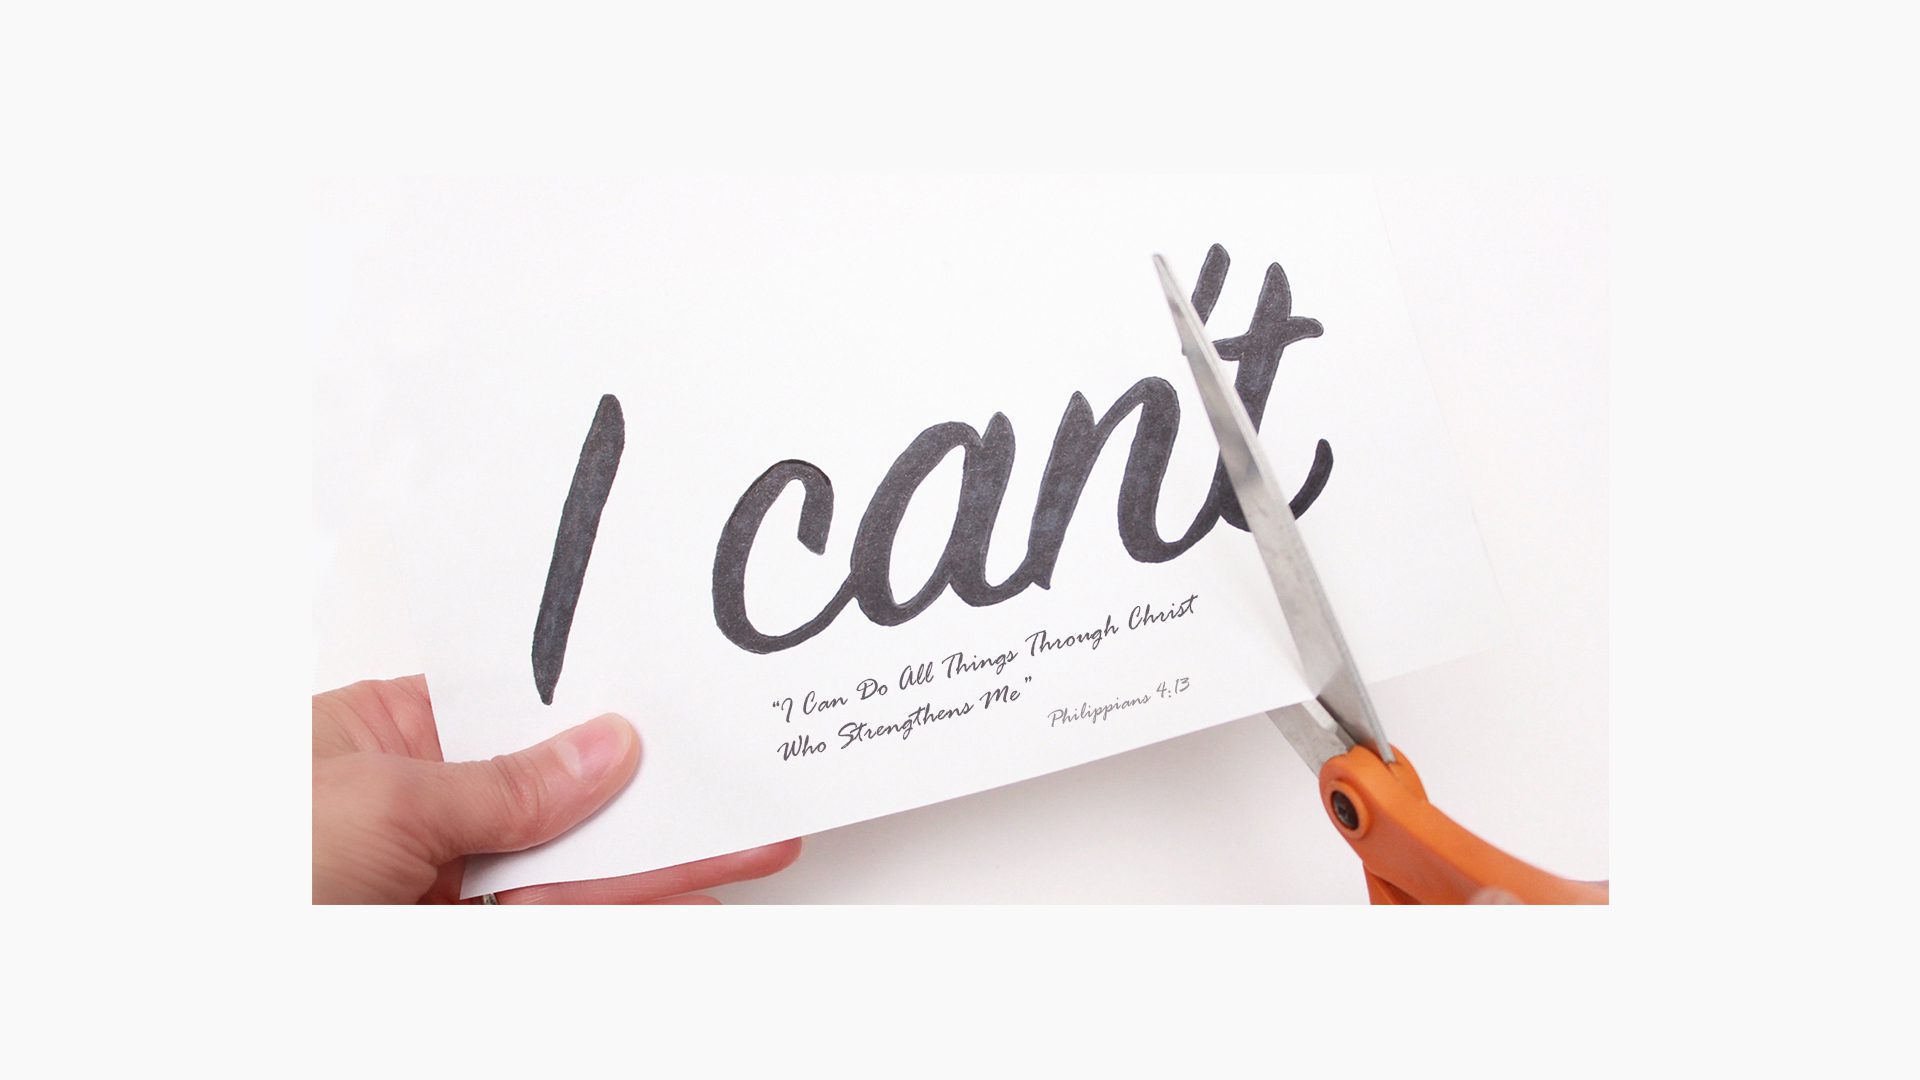 Suicide Prevention - I Can